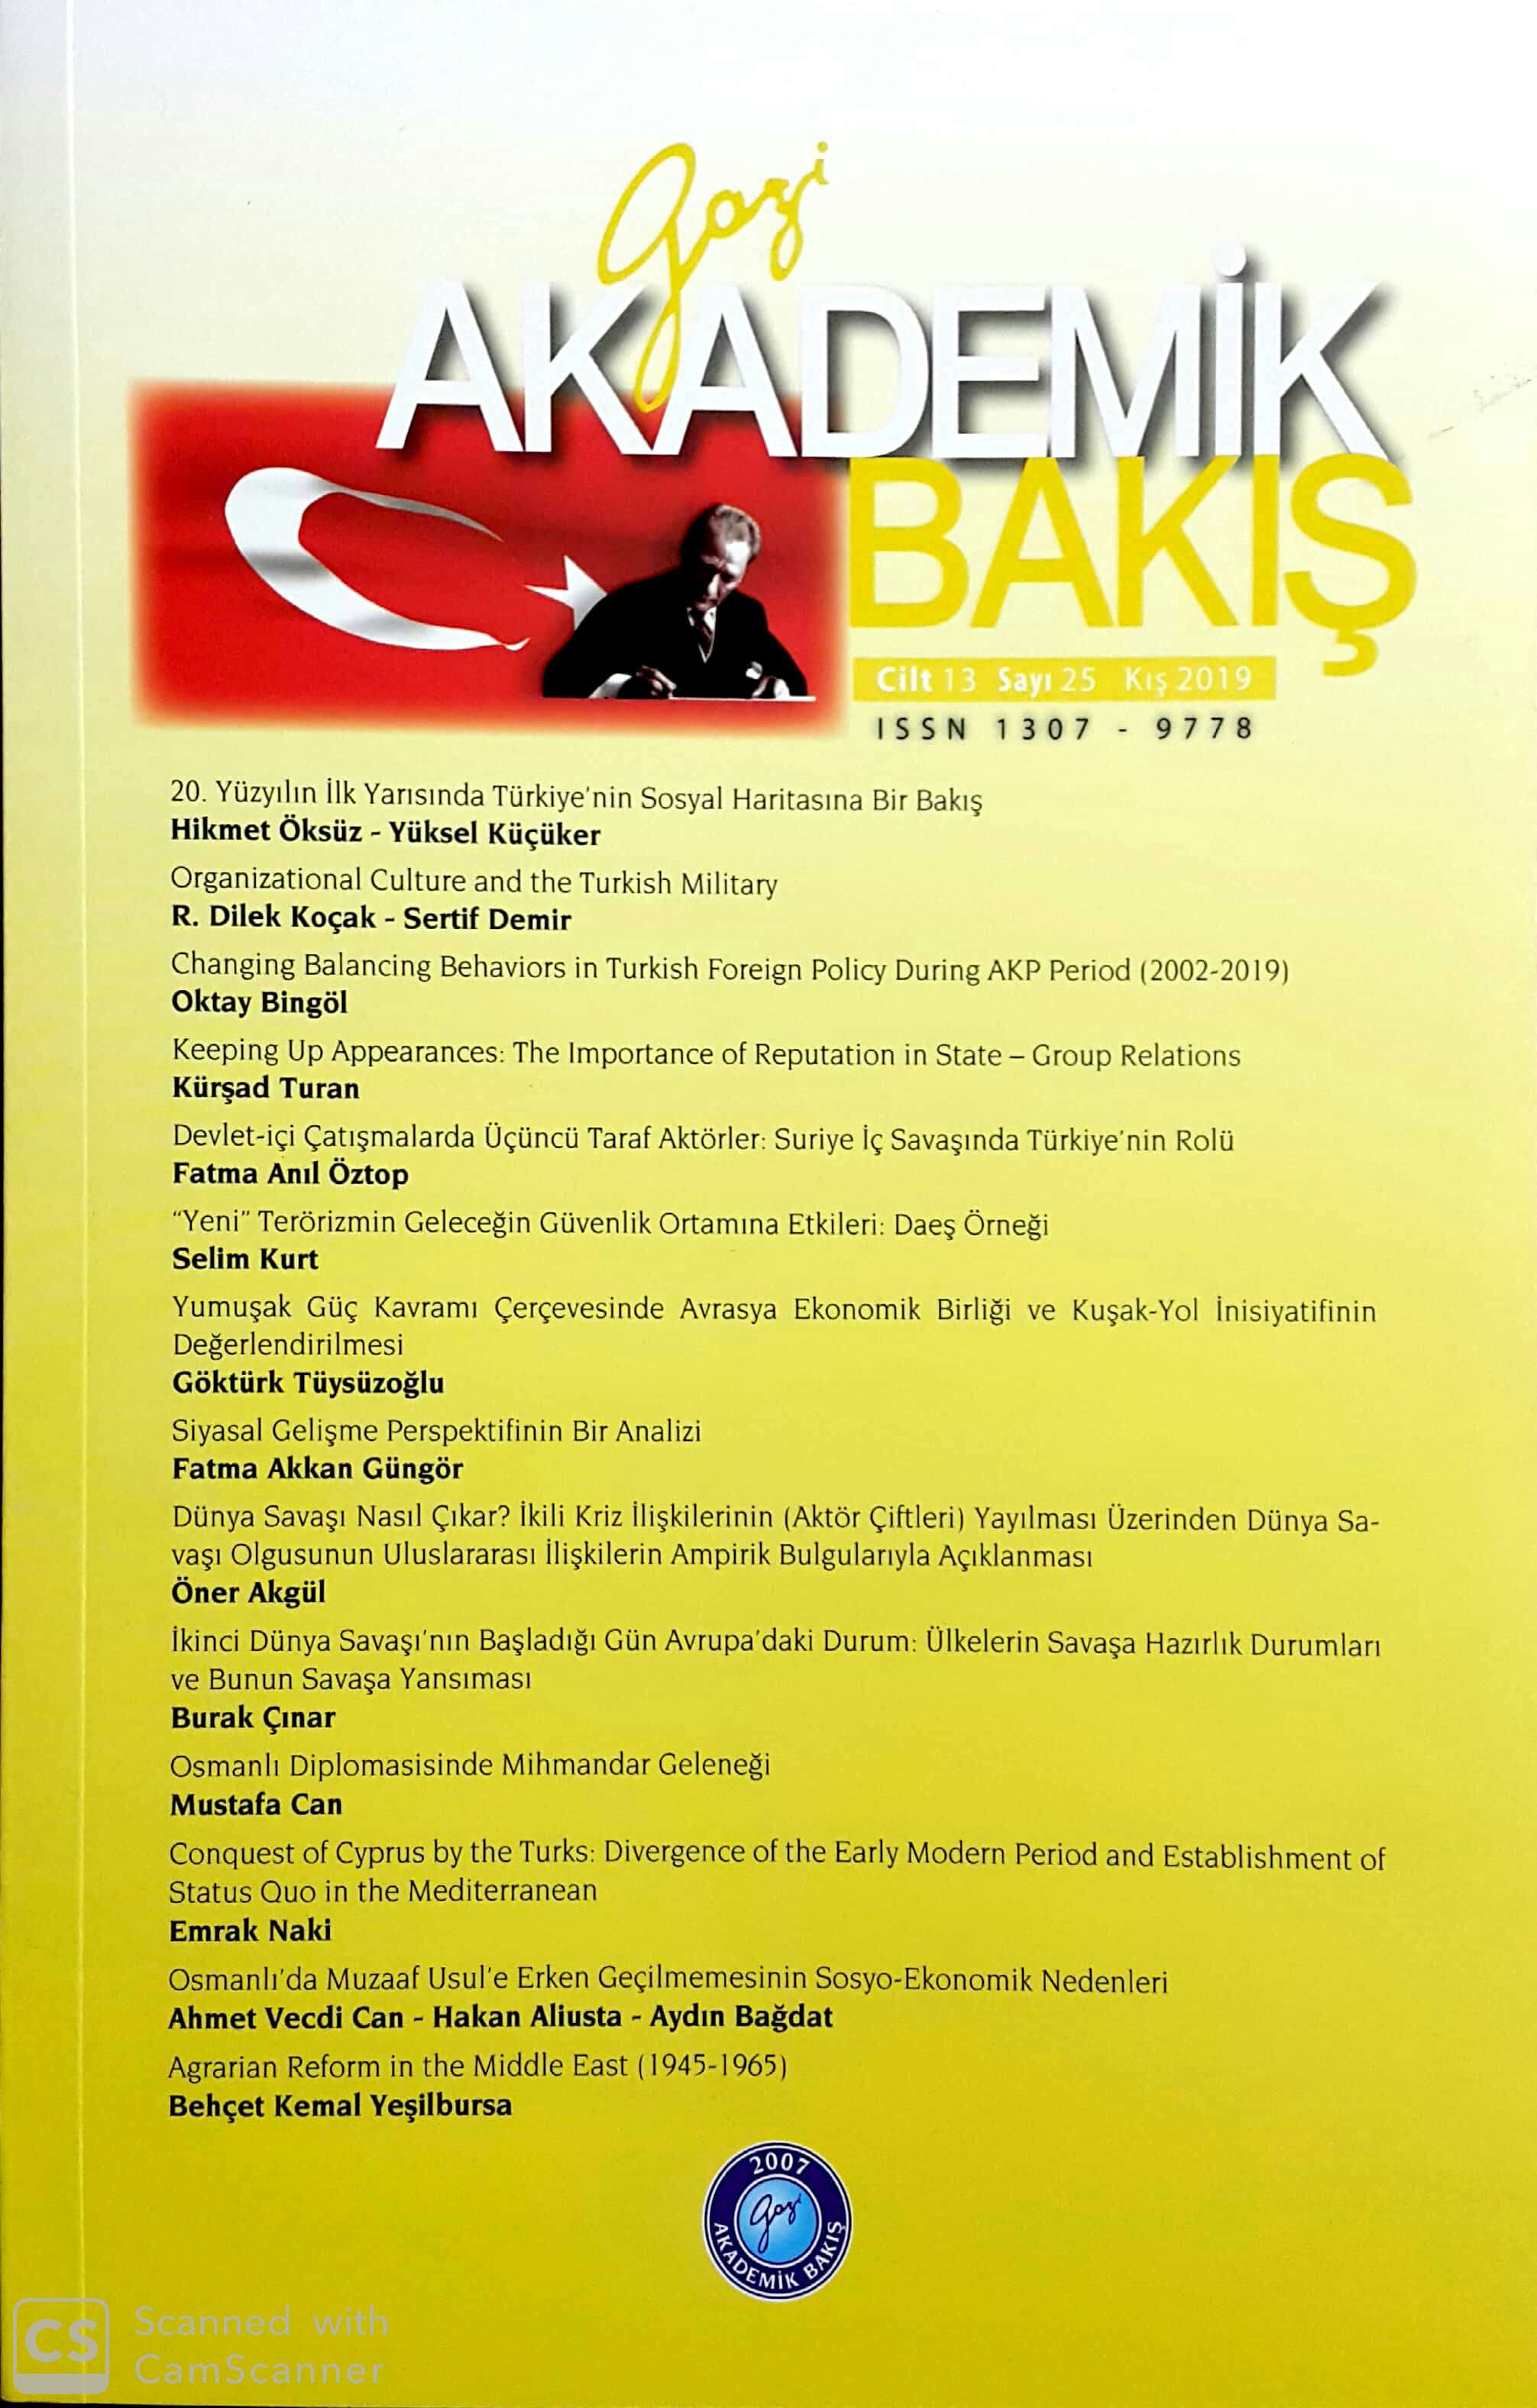 Organizational Culture and the Turkish Military